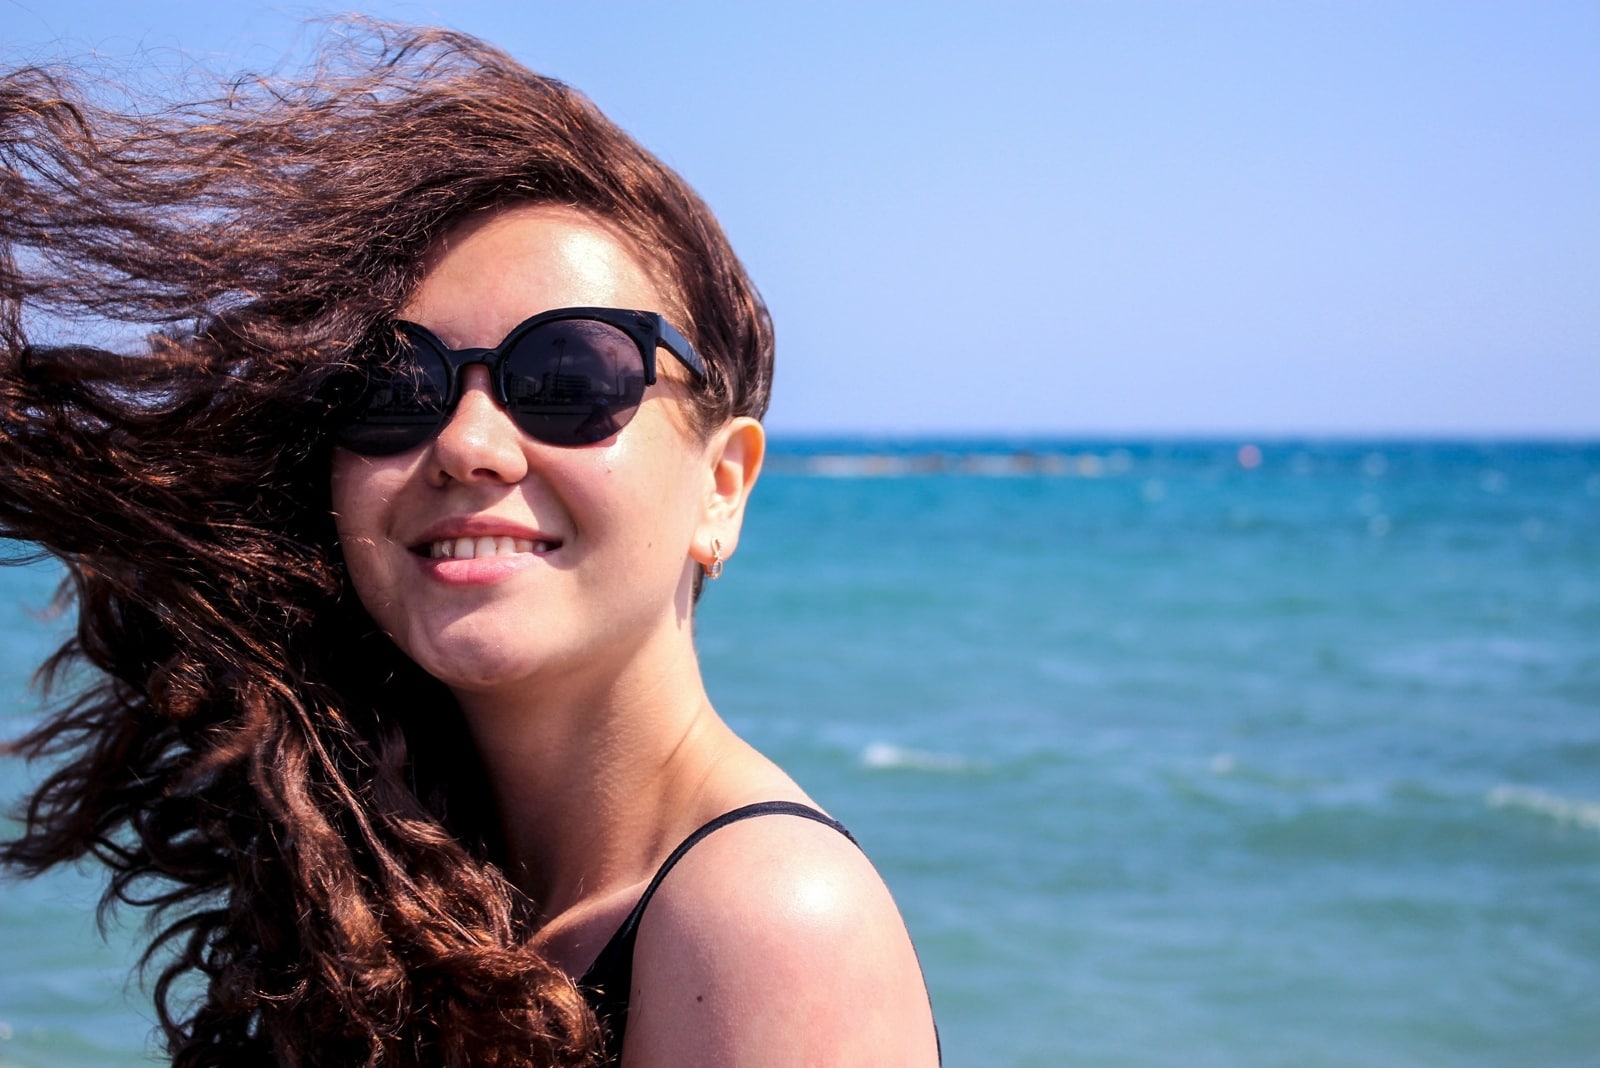 woman with sunglasses standing near sea